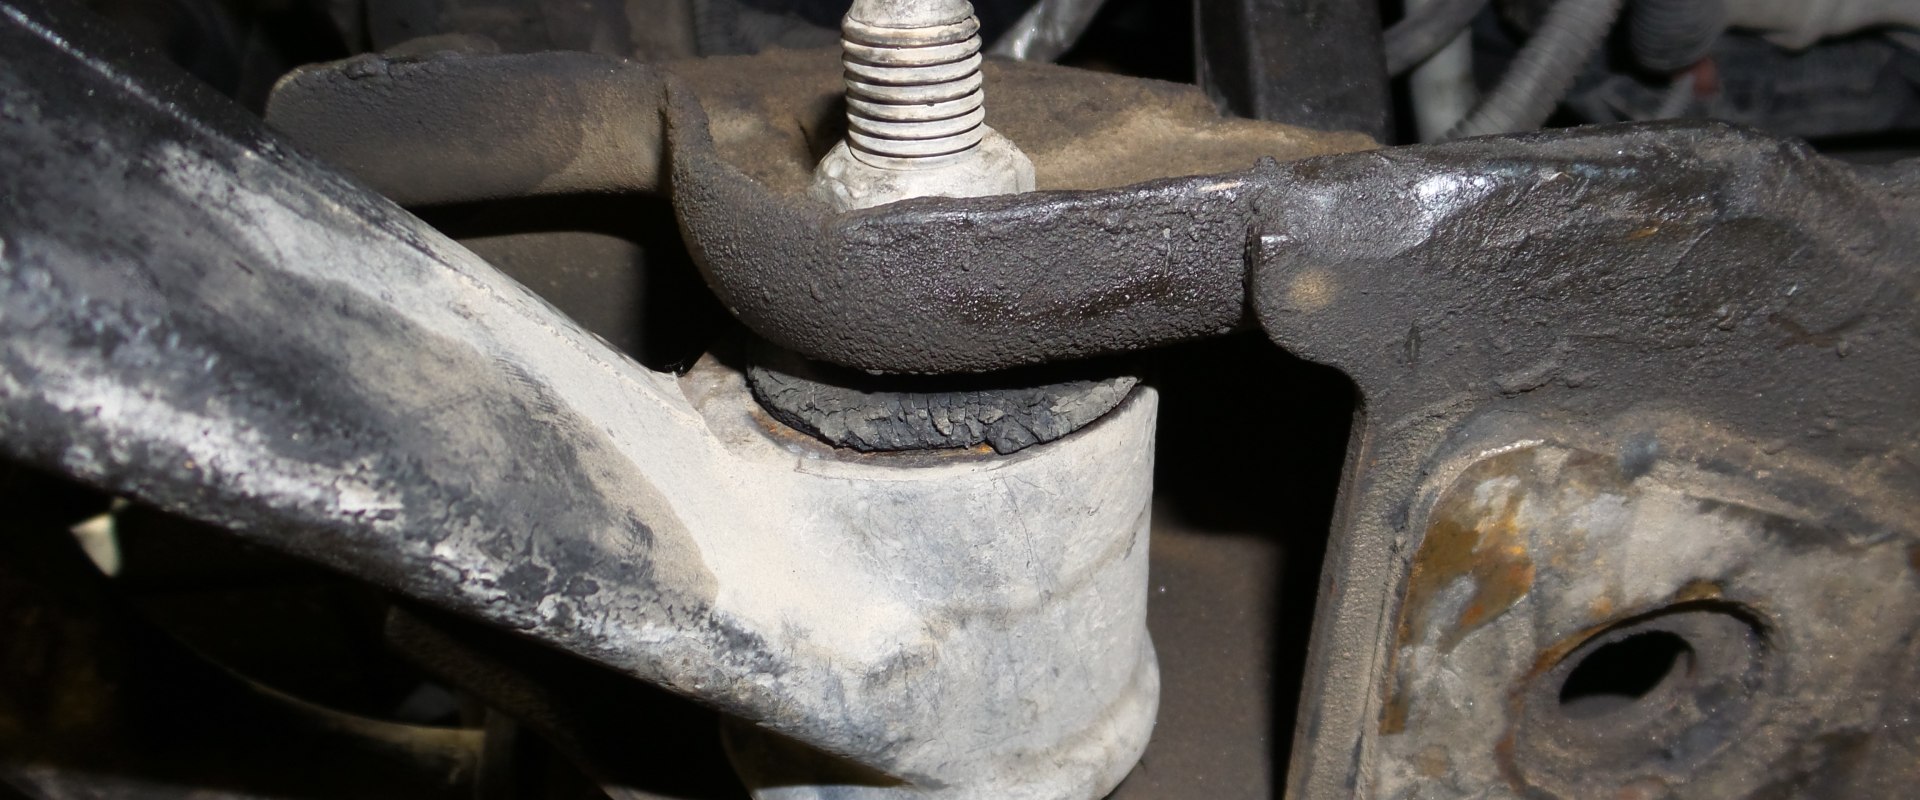 Bushings: Learn About This Important Truck Suspension Component